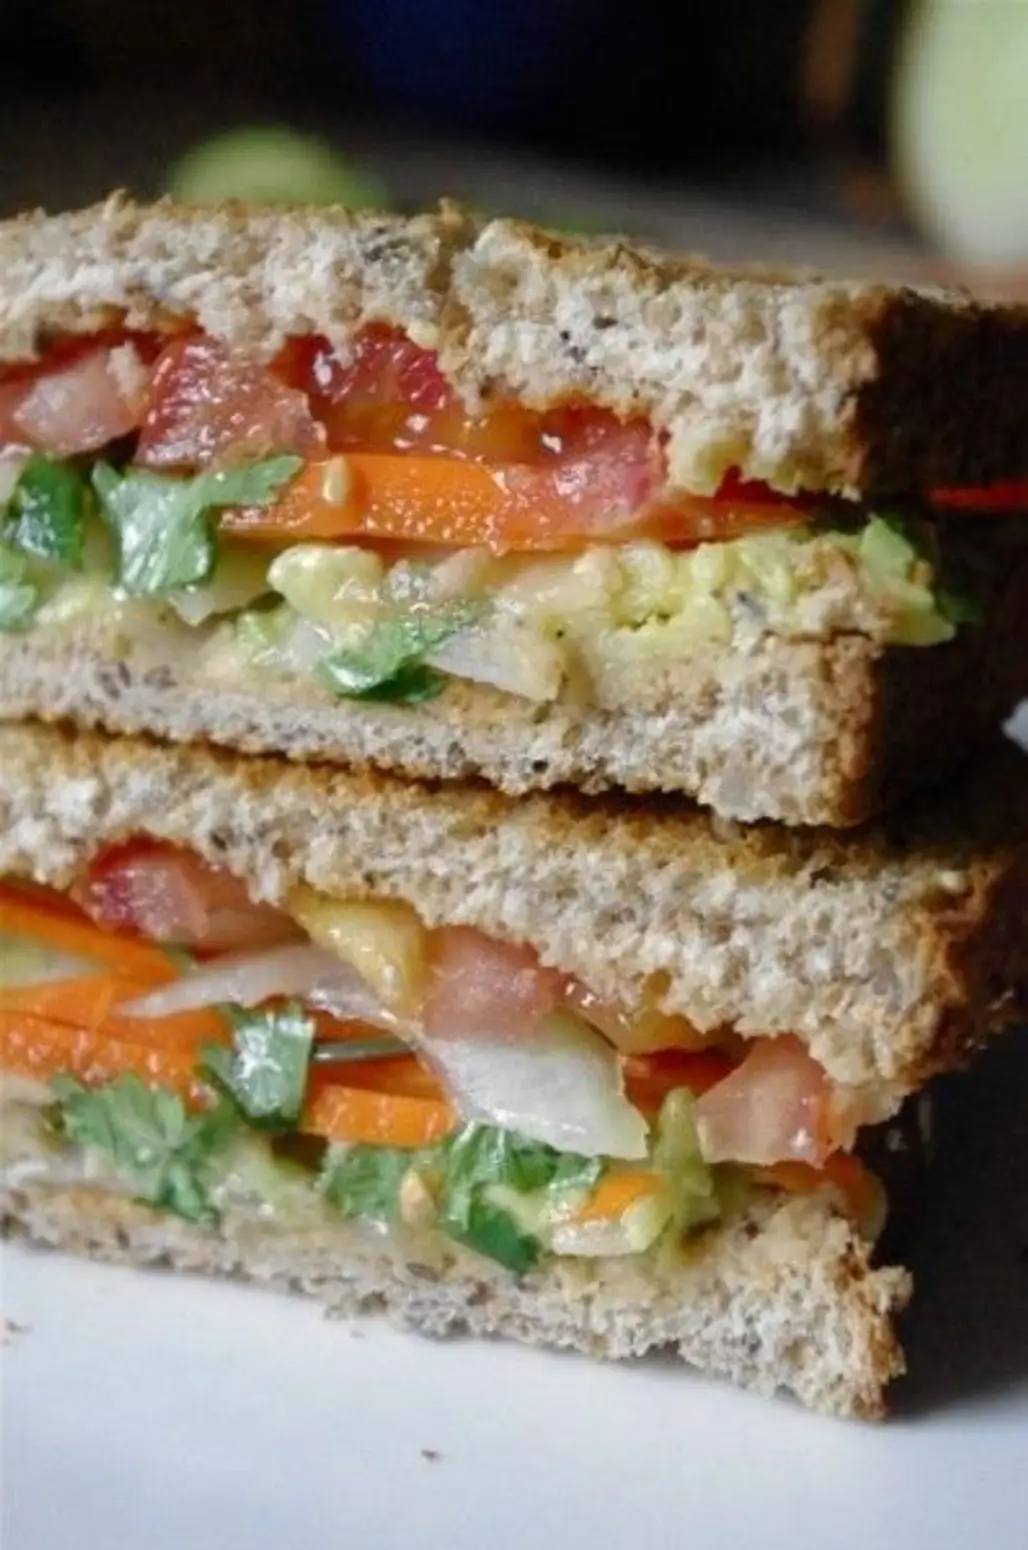 This Avocado & Spiced Hummus Sandwich is Packed with Flavor